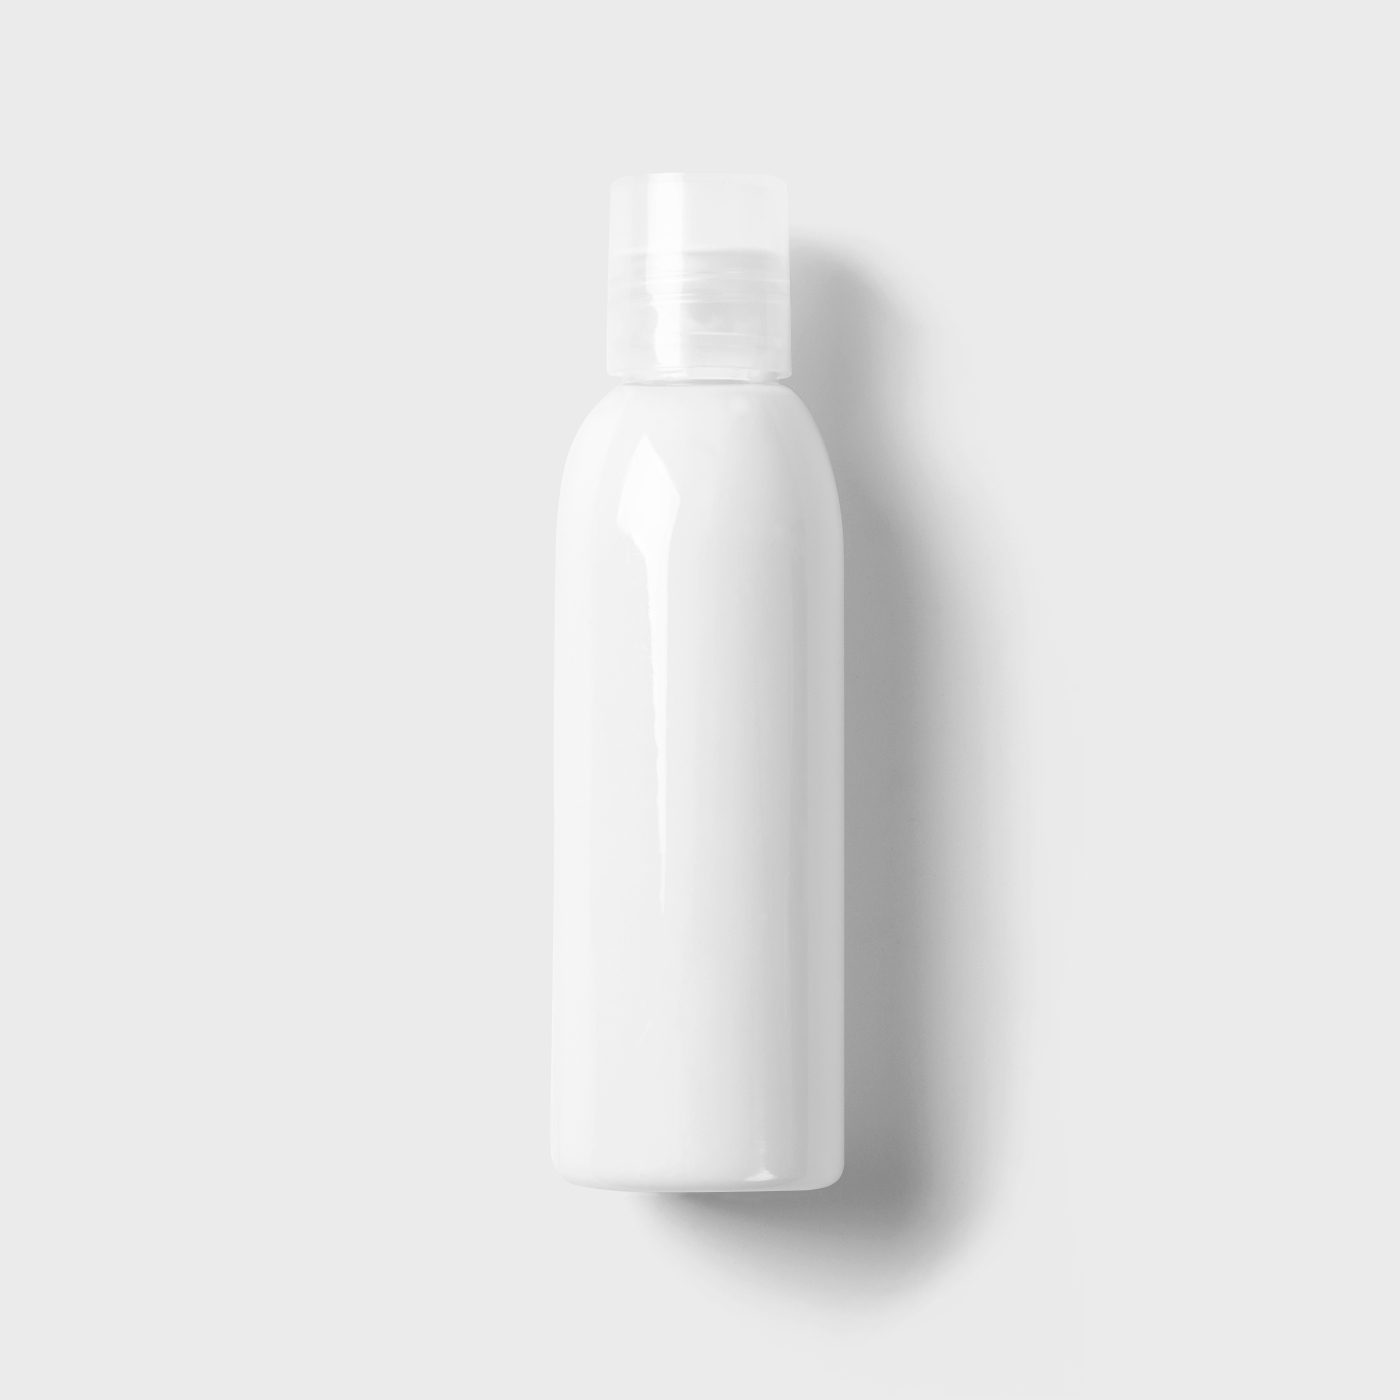 2 Mockups of Cosmetic Bottle from Front View FREE PSD